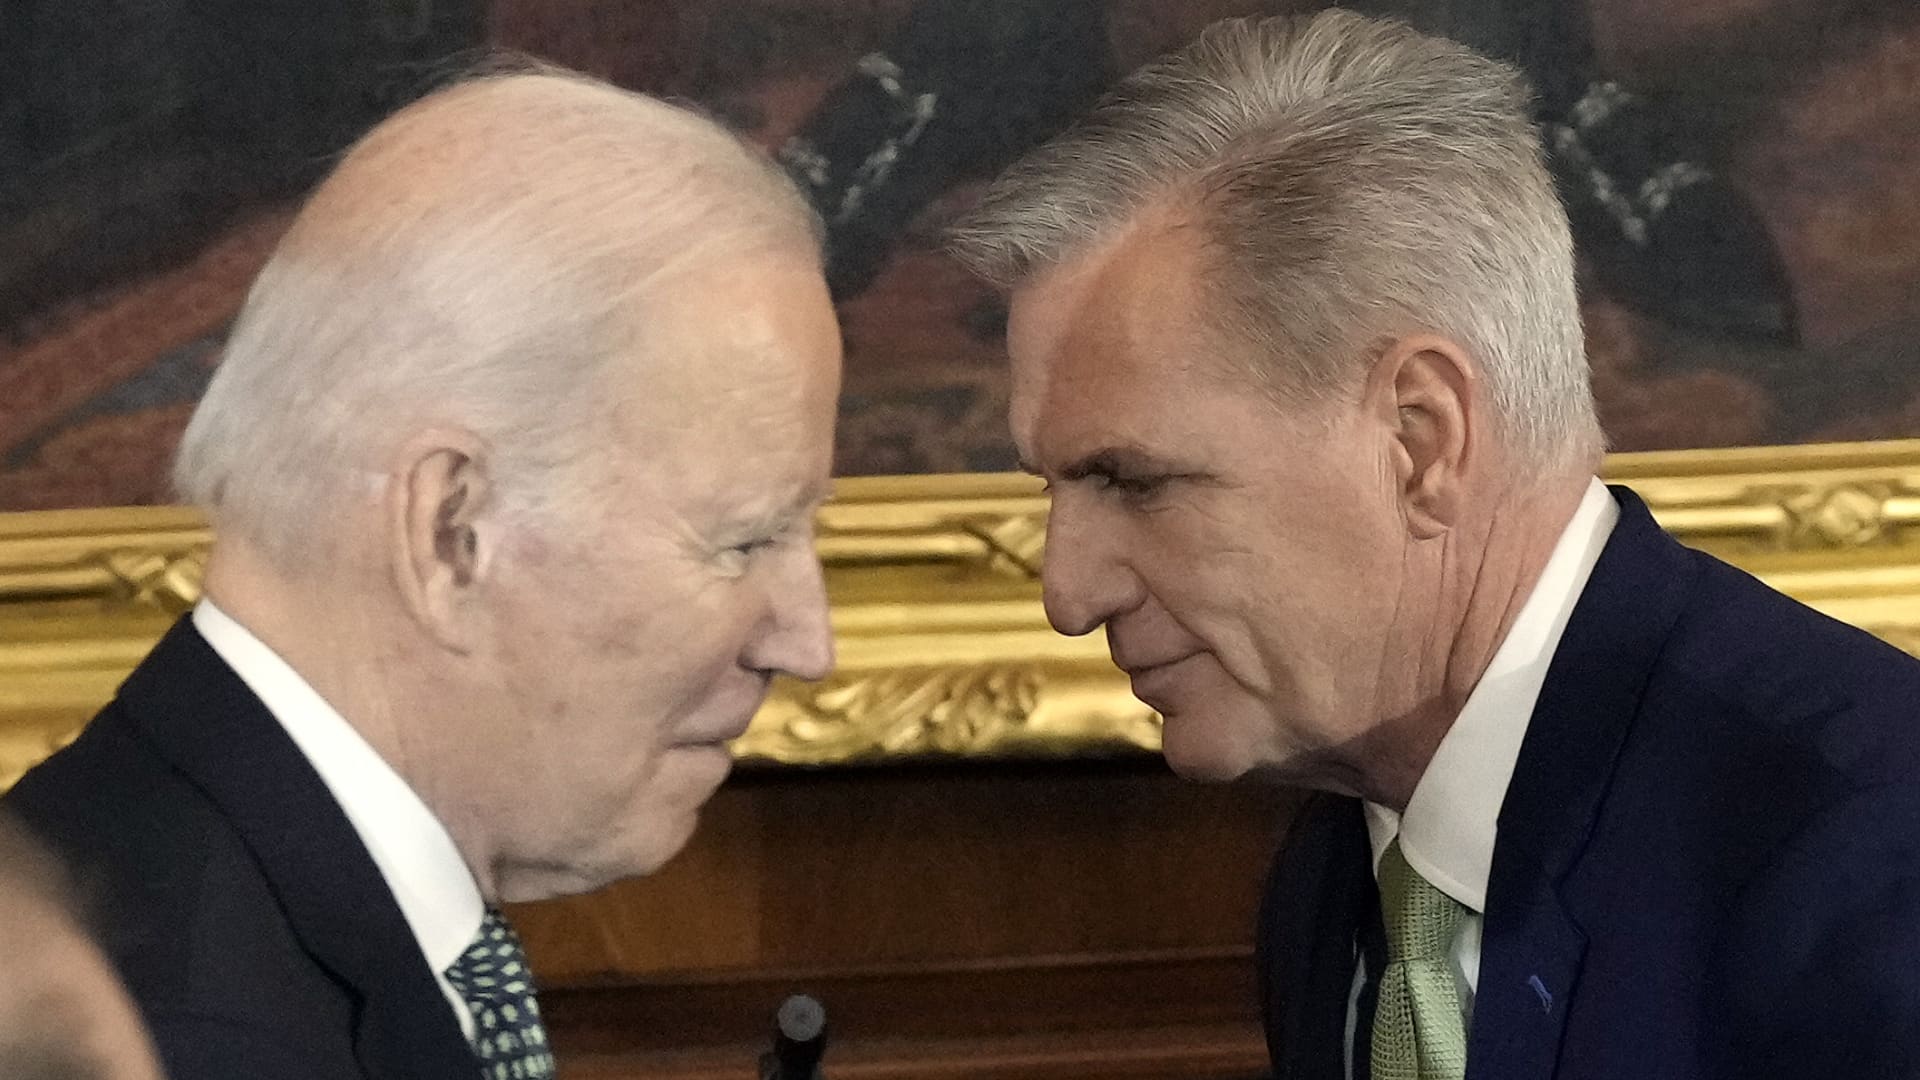 Biden and McCarthy to meet on the debt ceiling with only 10 days until U.S. risks default